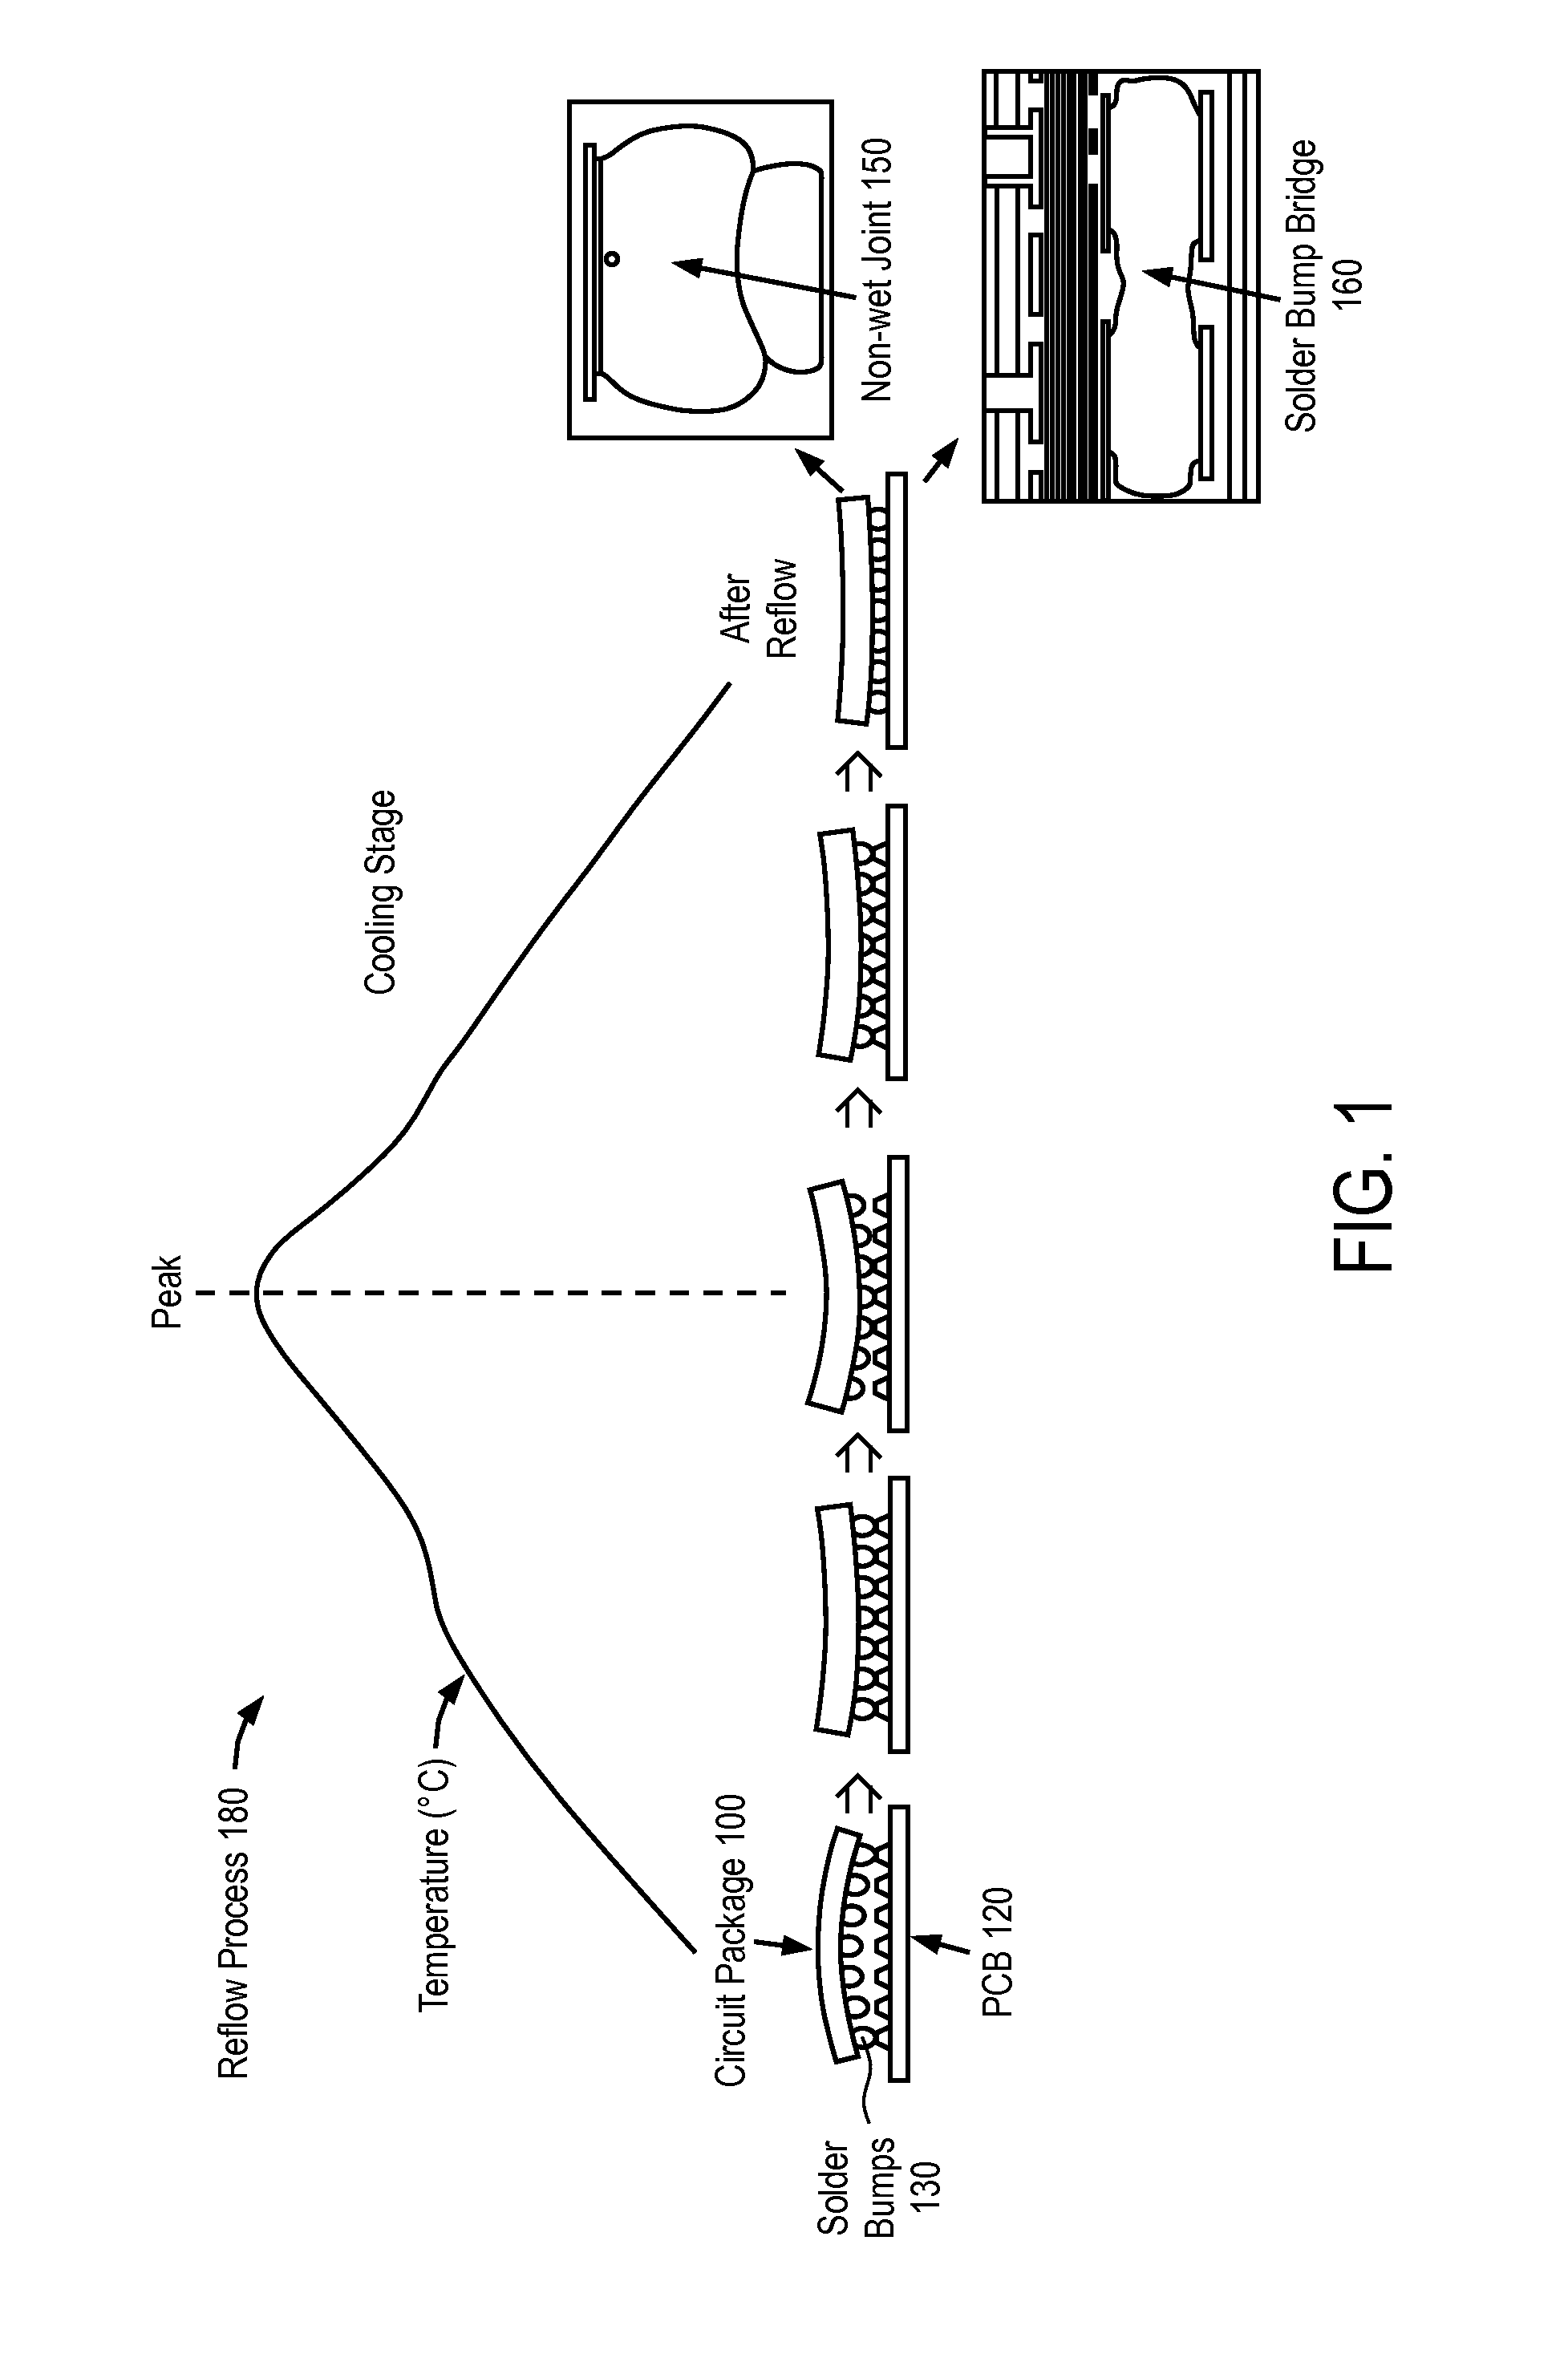 Substrate metallization and ball attach metallurgy with a novel dopant element